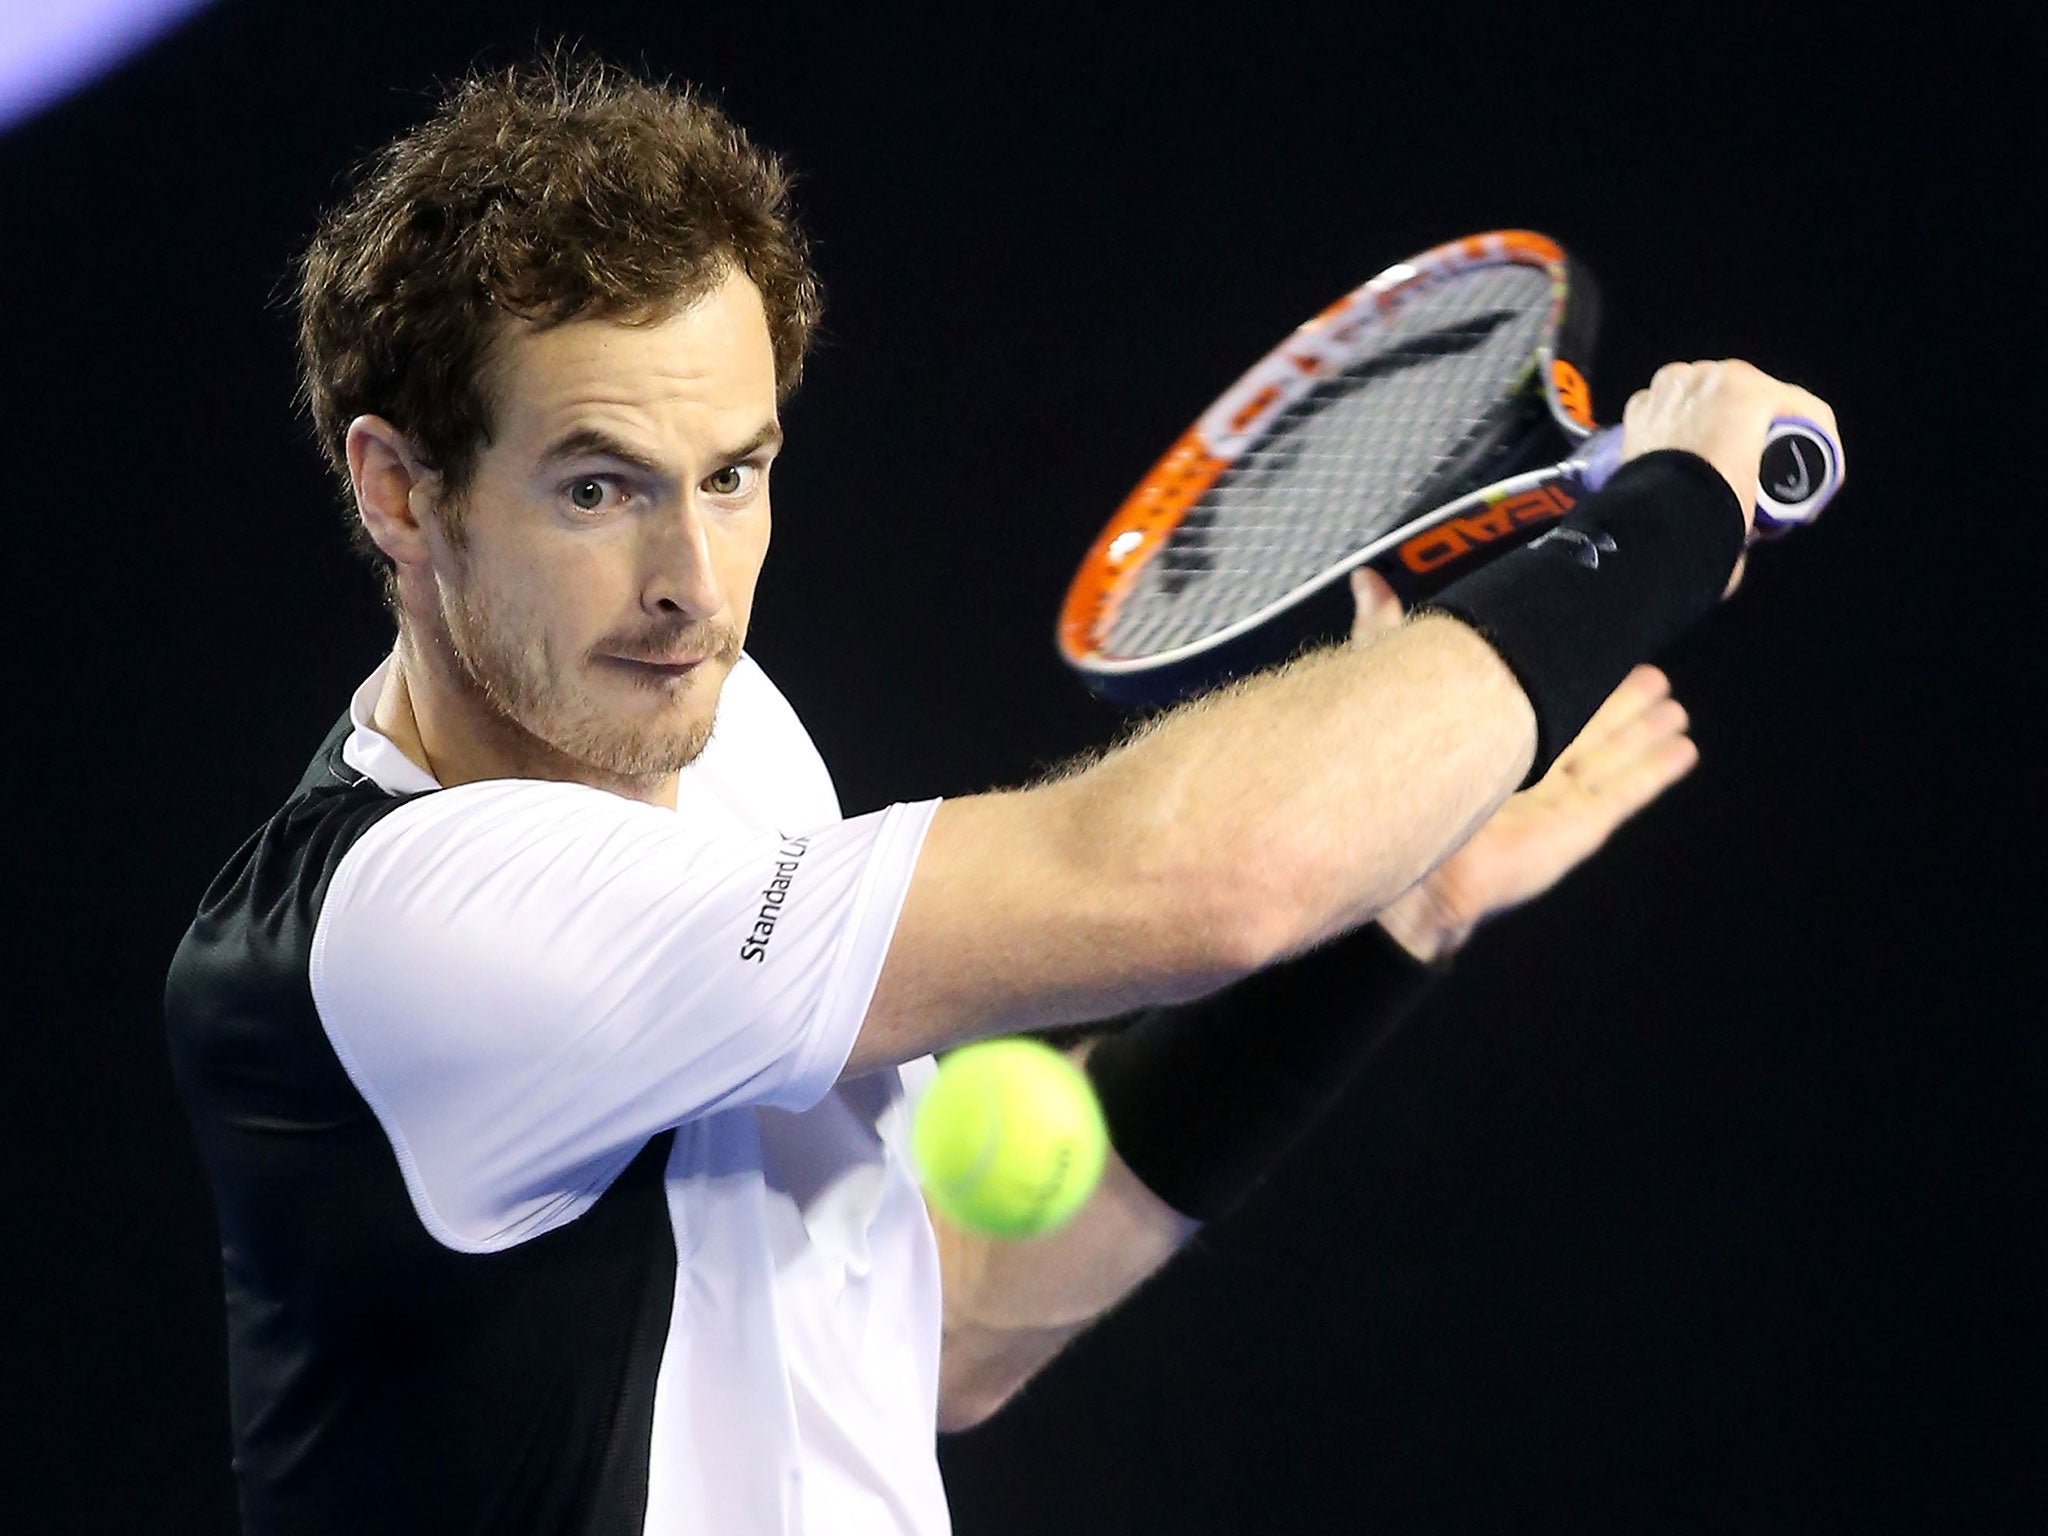 Critics hit out at energy companies and credit cards as Andy Murray fought to reach the Austalian Open final